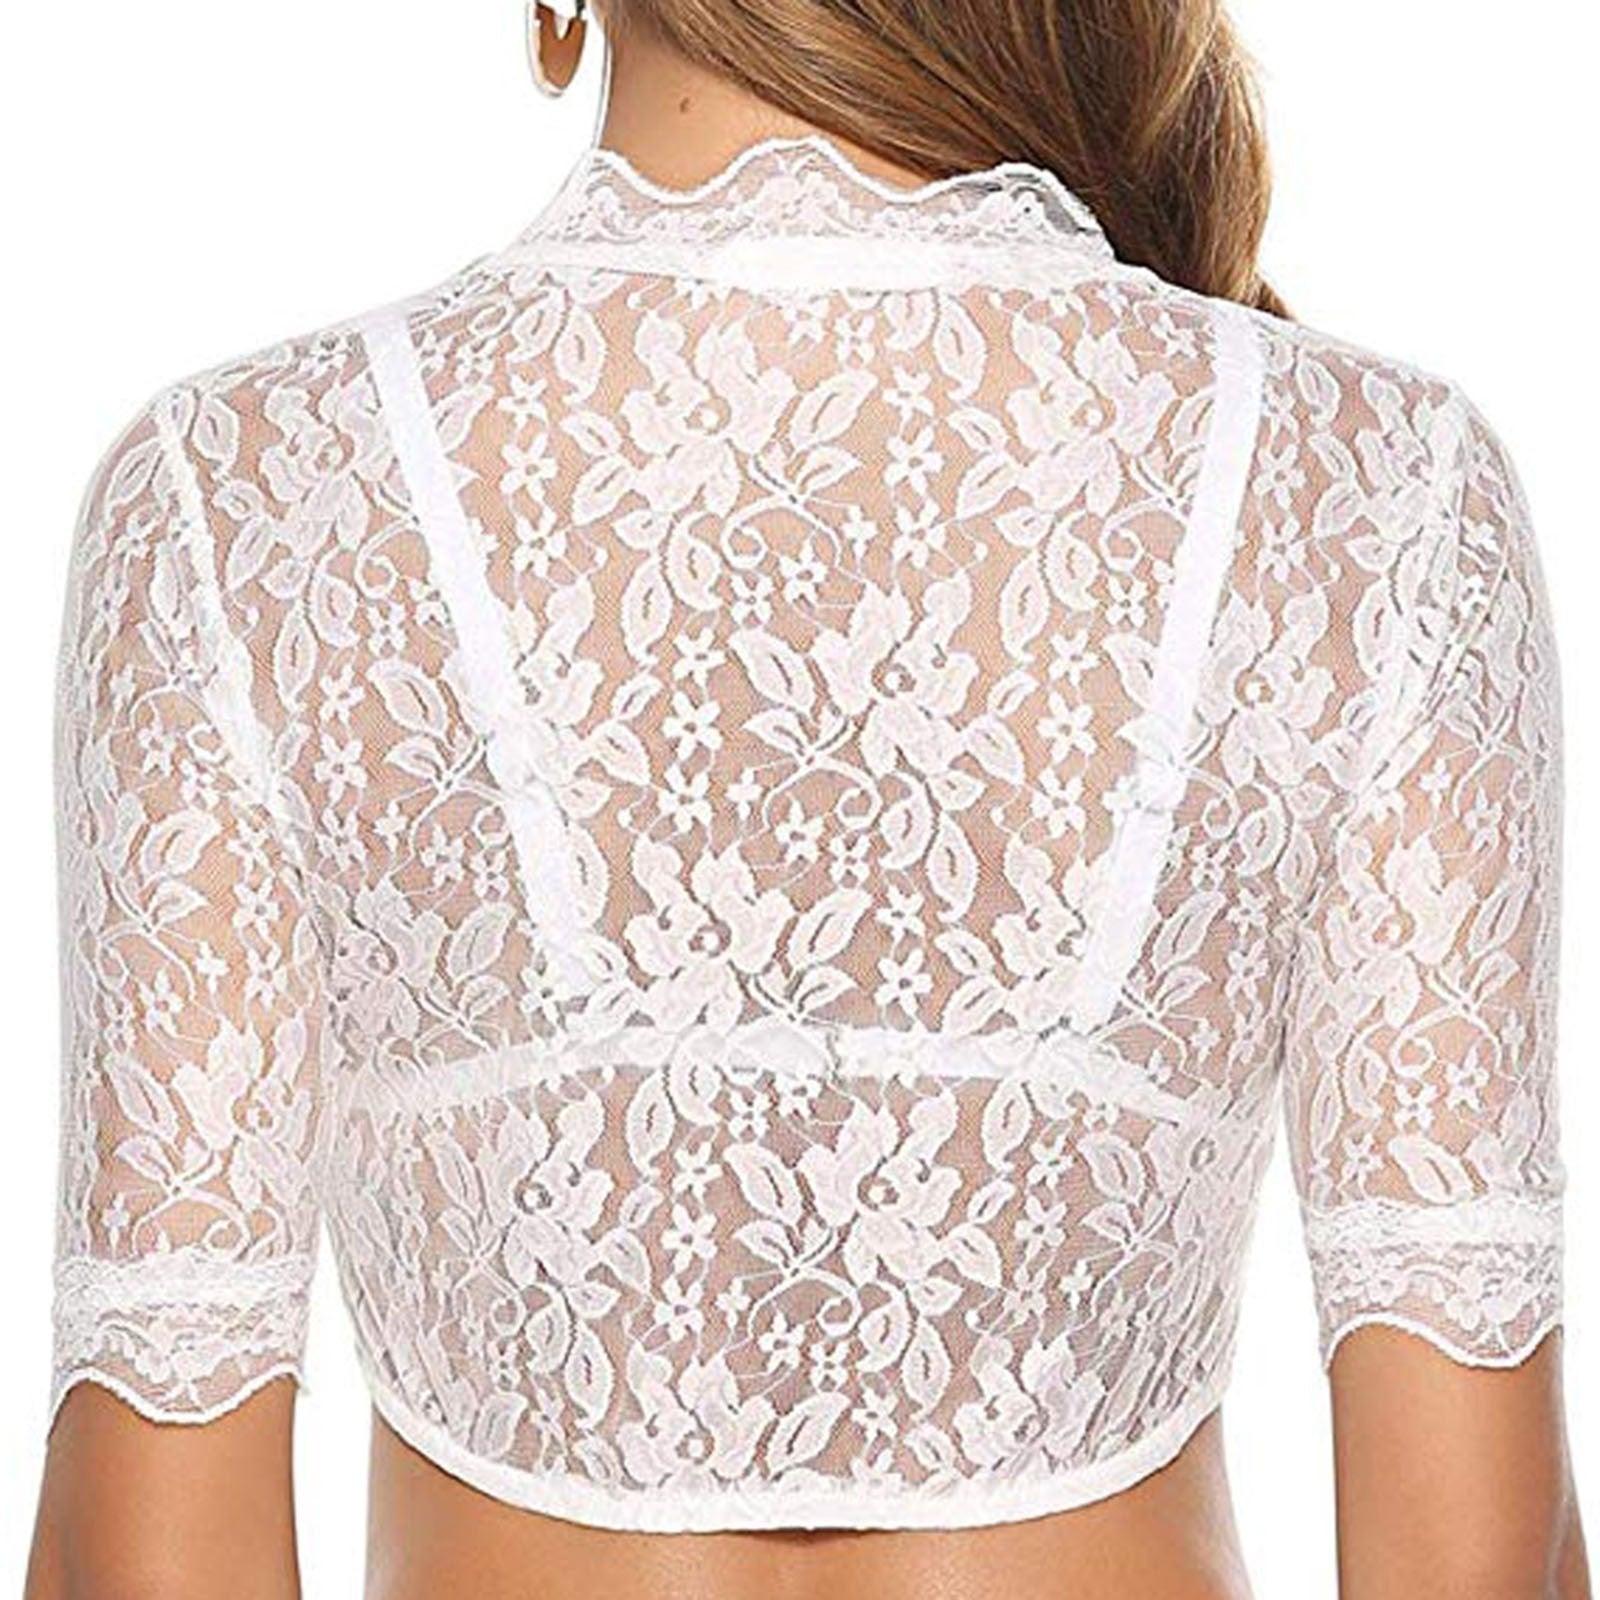 Women's Shirts - Cropped Tops Elegant Petite Lingerie Jacket For Women Sexy